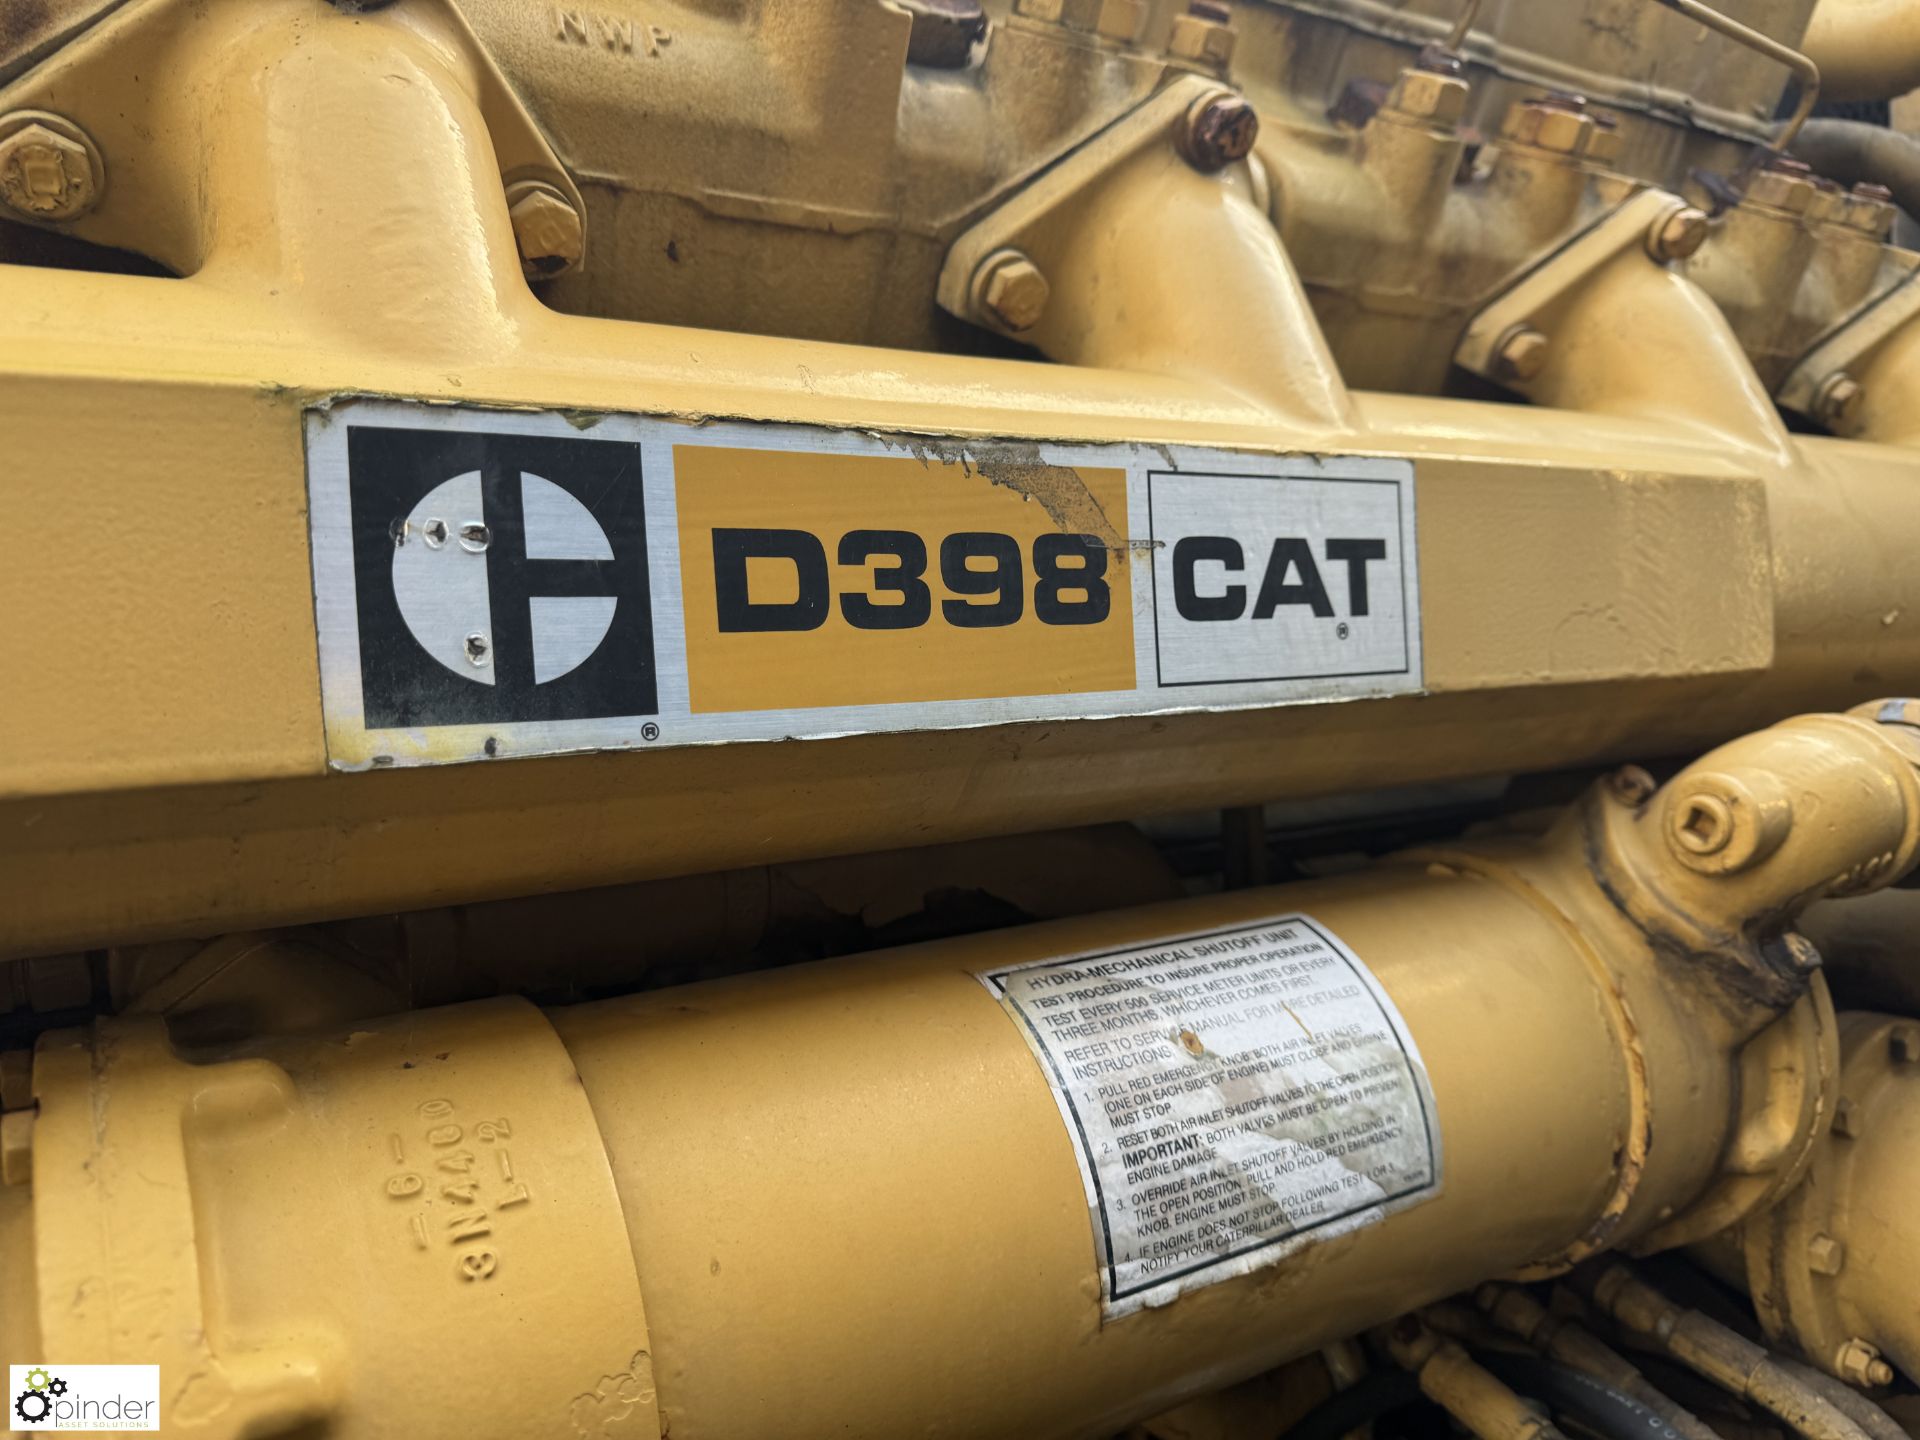 Caterpillar skid mounted Generator, 1,000kva with CAT D398 engine, 800HP 12-cylinder, engine - Image 5 of 23